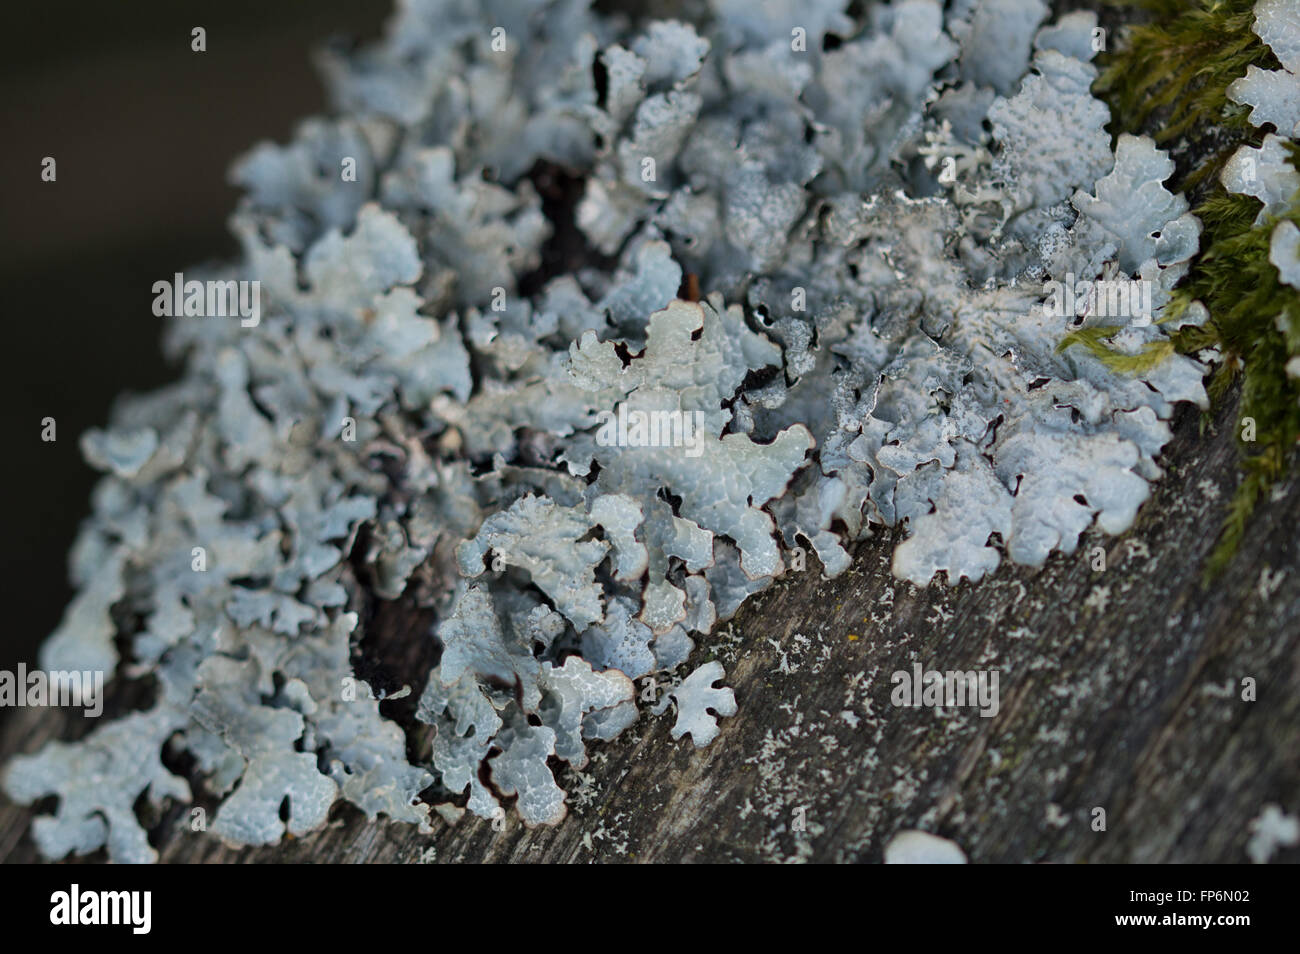 Hammered shield lichen (Parmelia sulcata) growing on a wooden post. Stock Photo